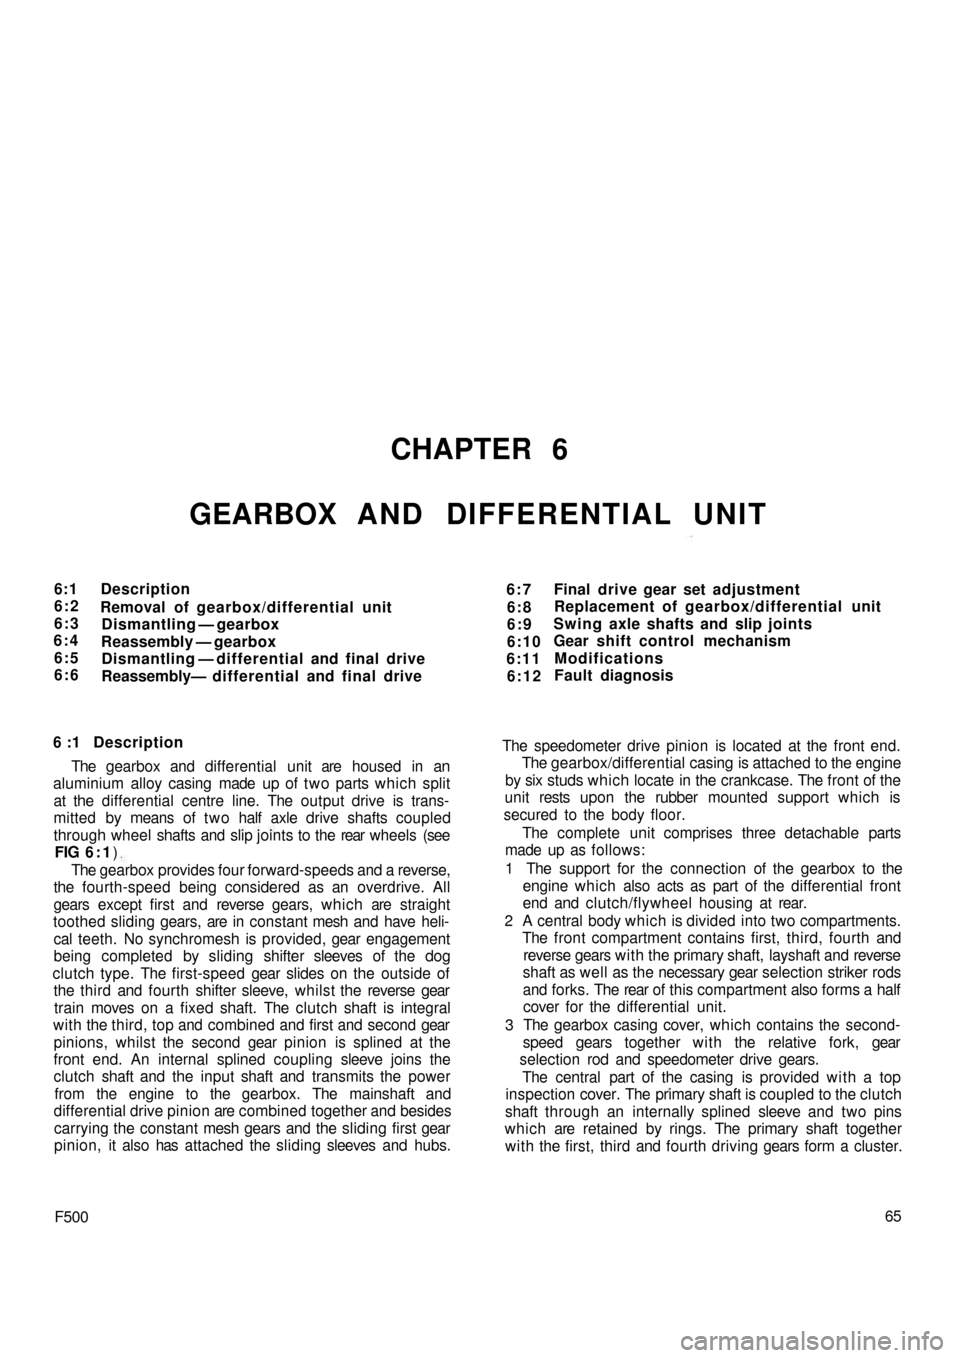 FIAT 500 1959 1.G Service Manual CHAPTER 6
GEARBOX AND DIFFERENTIAL UNIT
6:1
6:2
6:3
6:4
6:5
6:6Description
Removal of gearbox/differential unit
Dismantling — gearbox
Reassembly — gearbox
Dismantling — differential and final dr